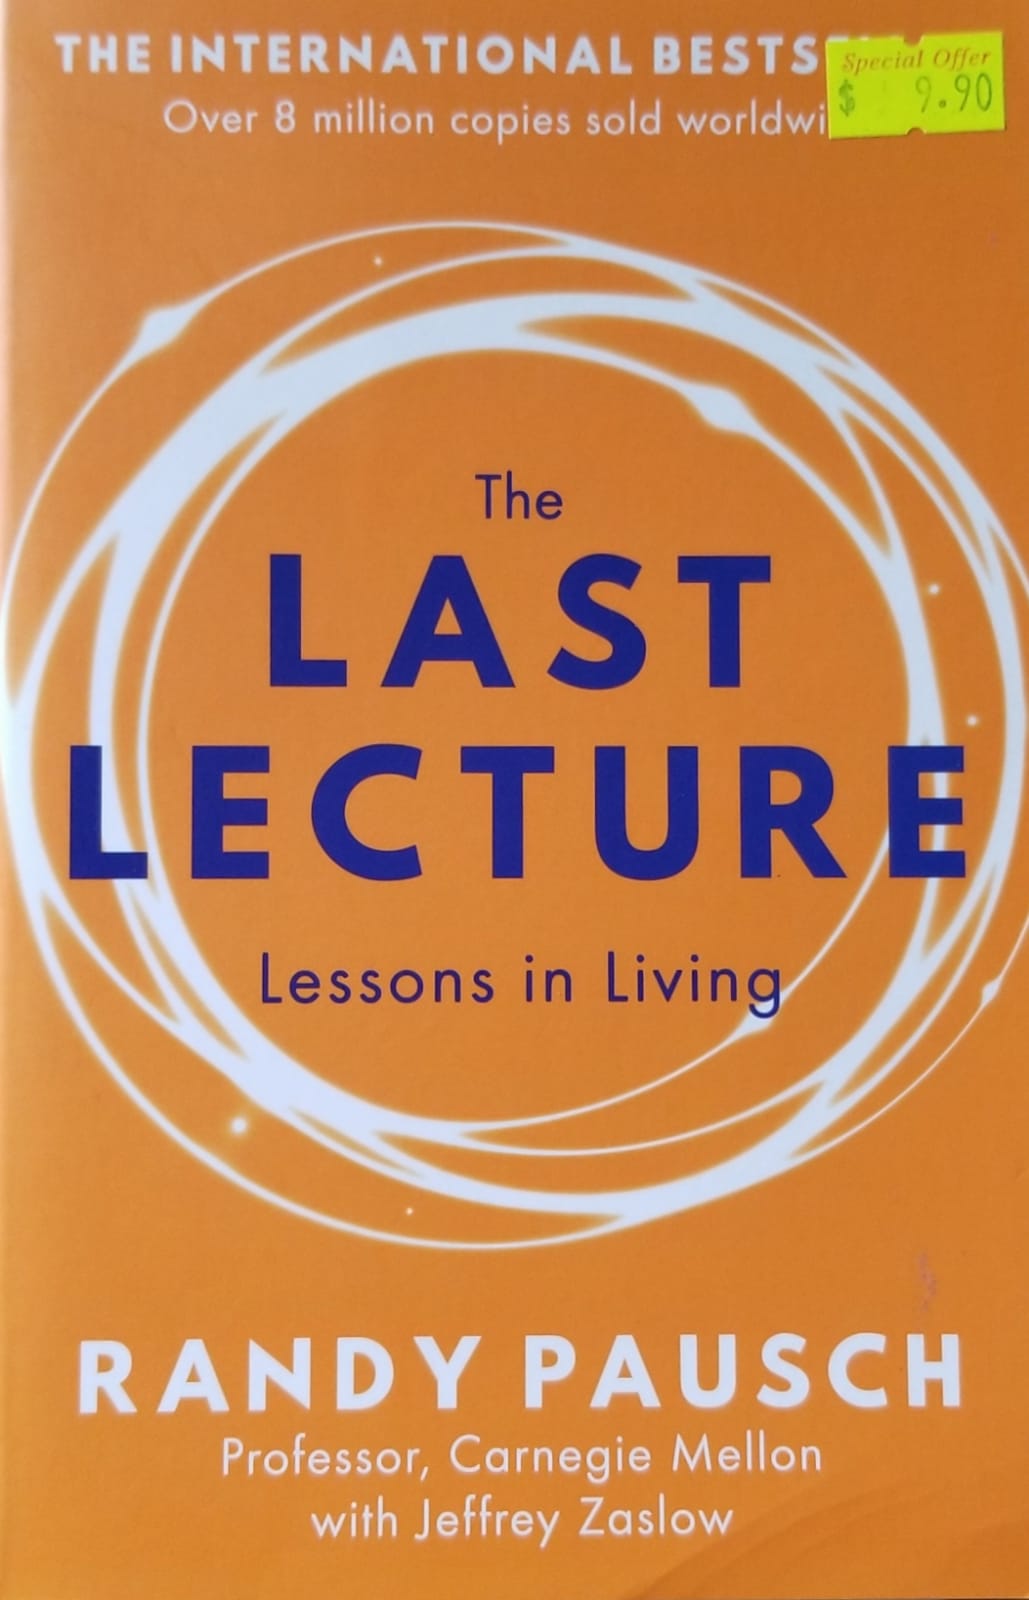 The Last Lecture - Randy Pausch